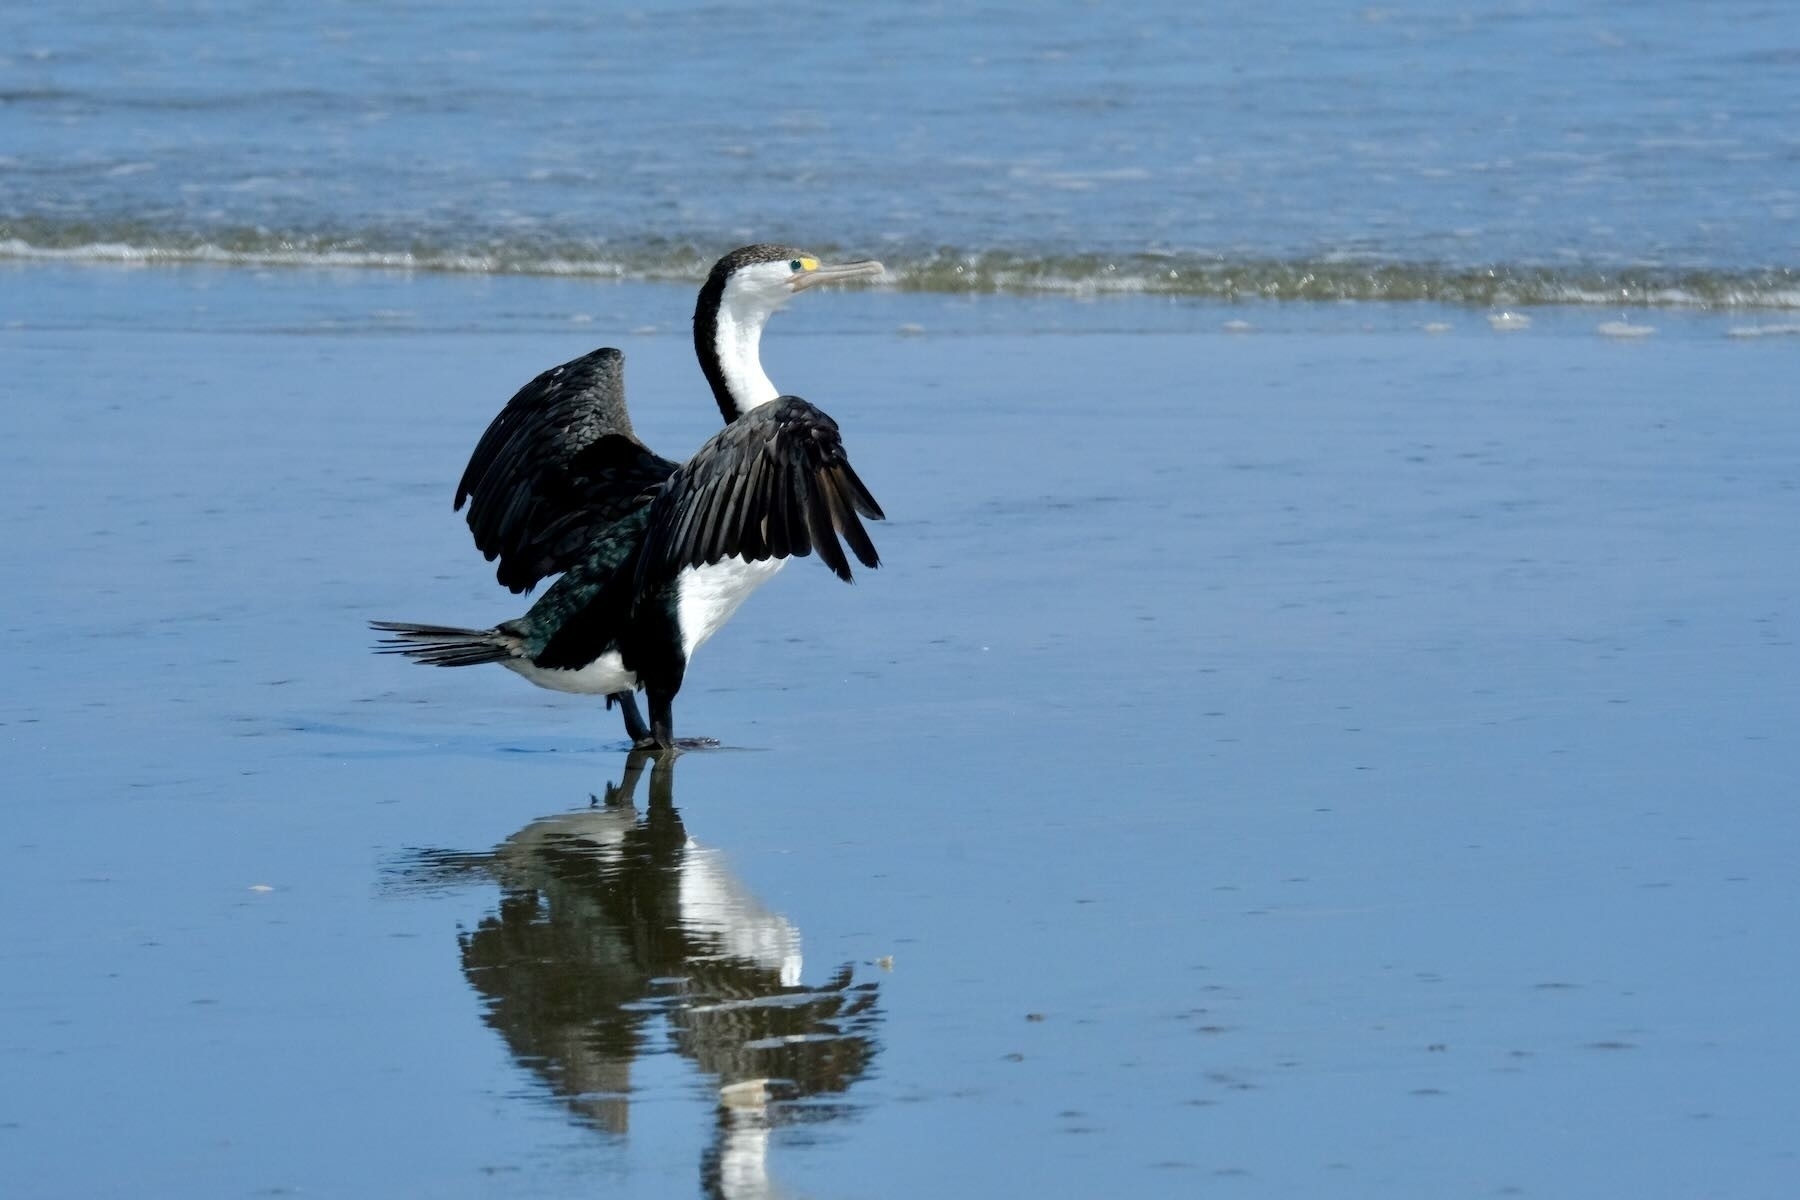 Pied shag with wings outstretched.